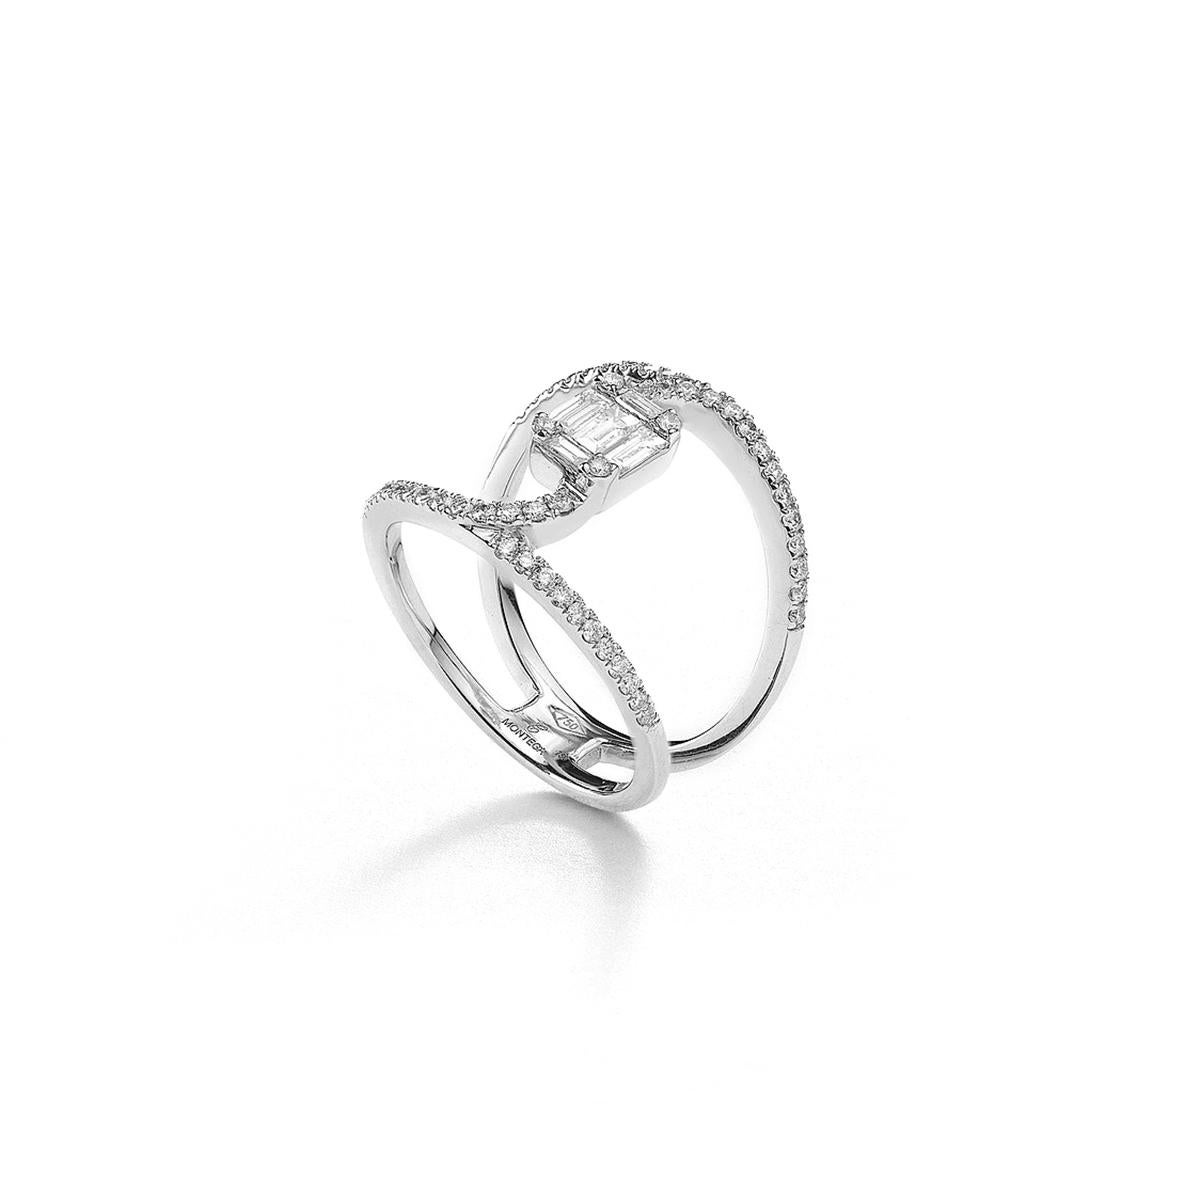 Ring in 18kt white gold set with 5 baguette cut diamonds 0.25 cts and 53 diamonds 0.39 cts Size 53